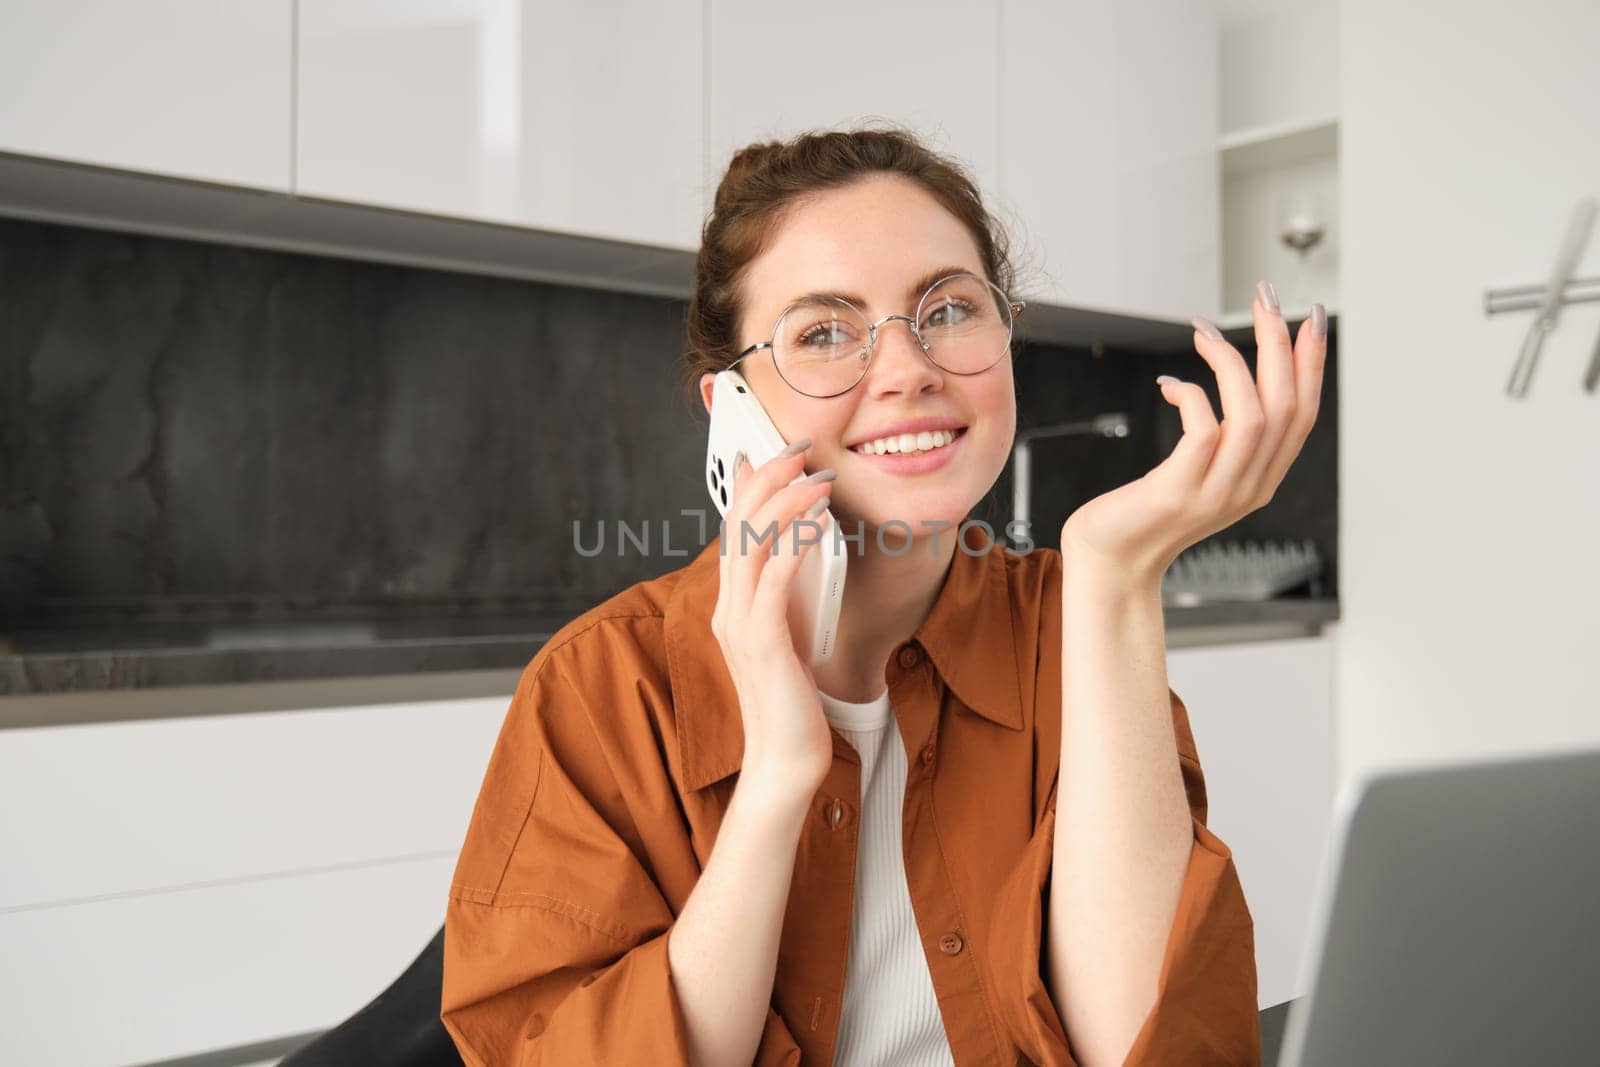 Portrait of young woman, business owner working from home, student making a phone call, sitting in kitchen with laptop, talking to someone.